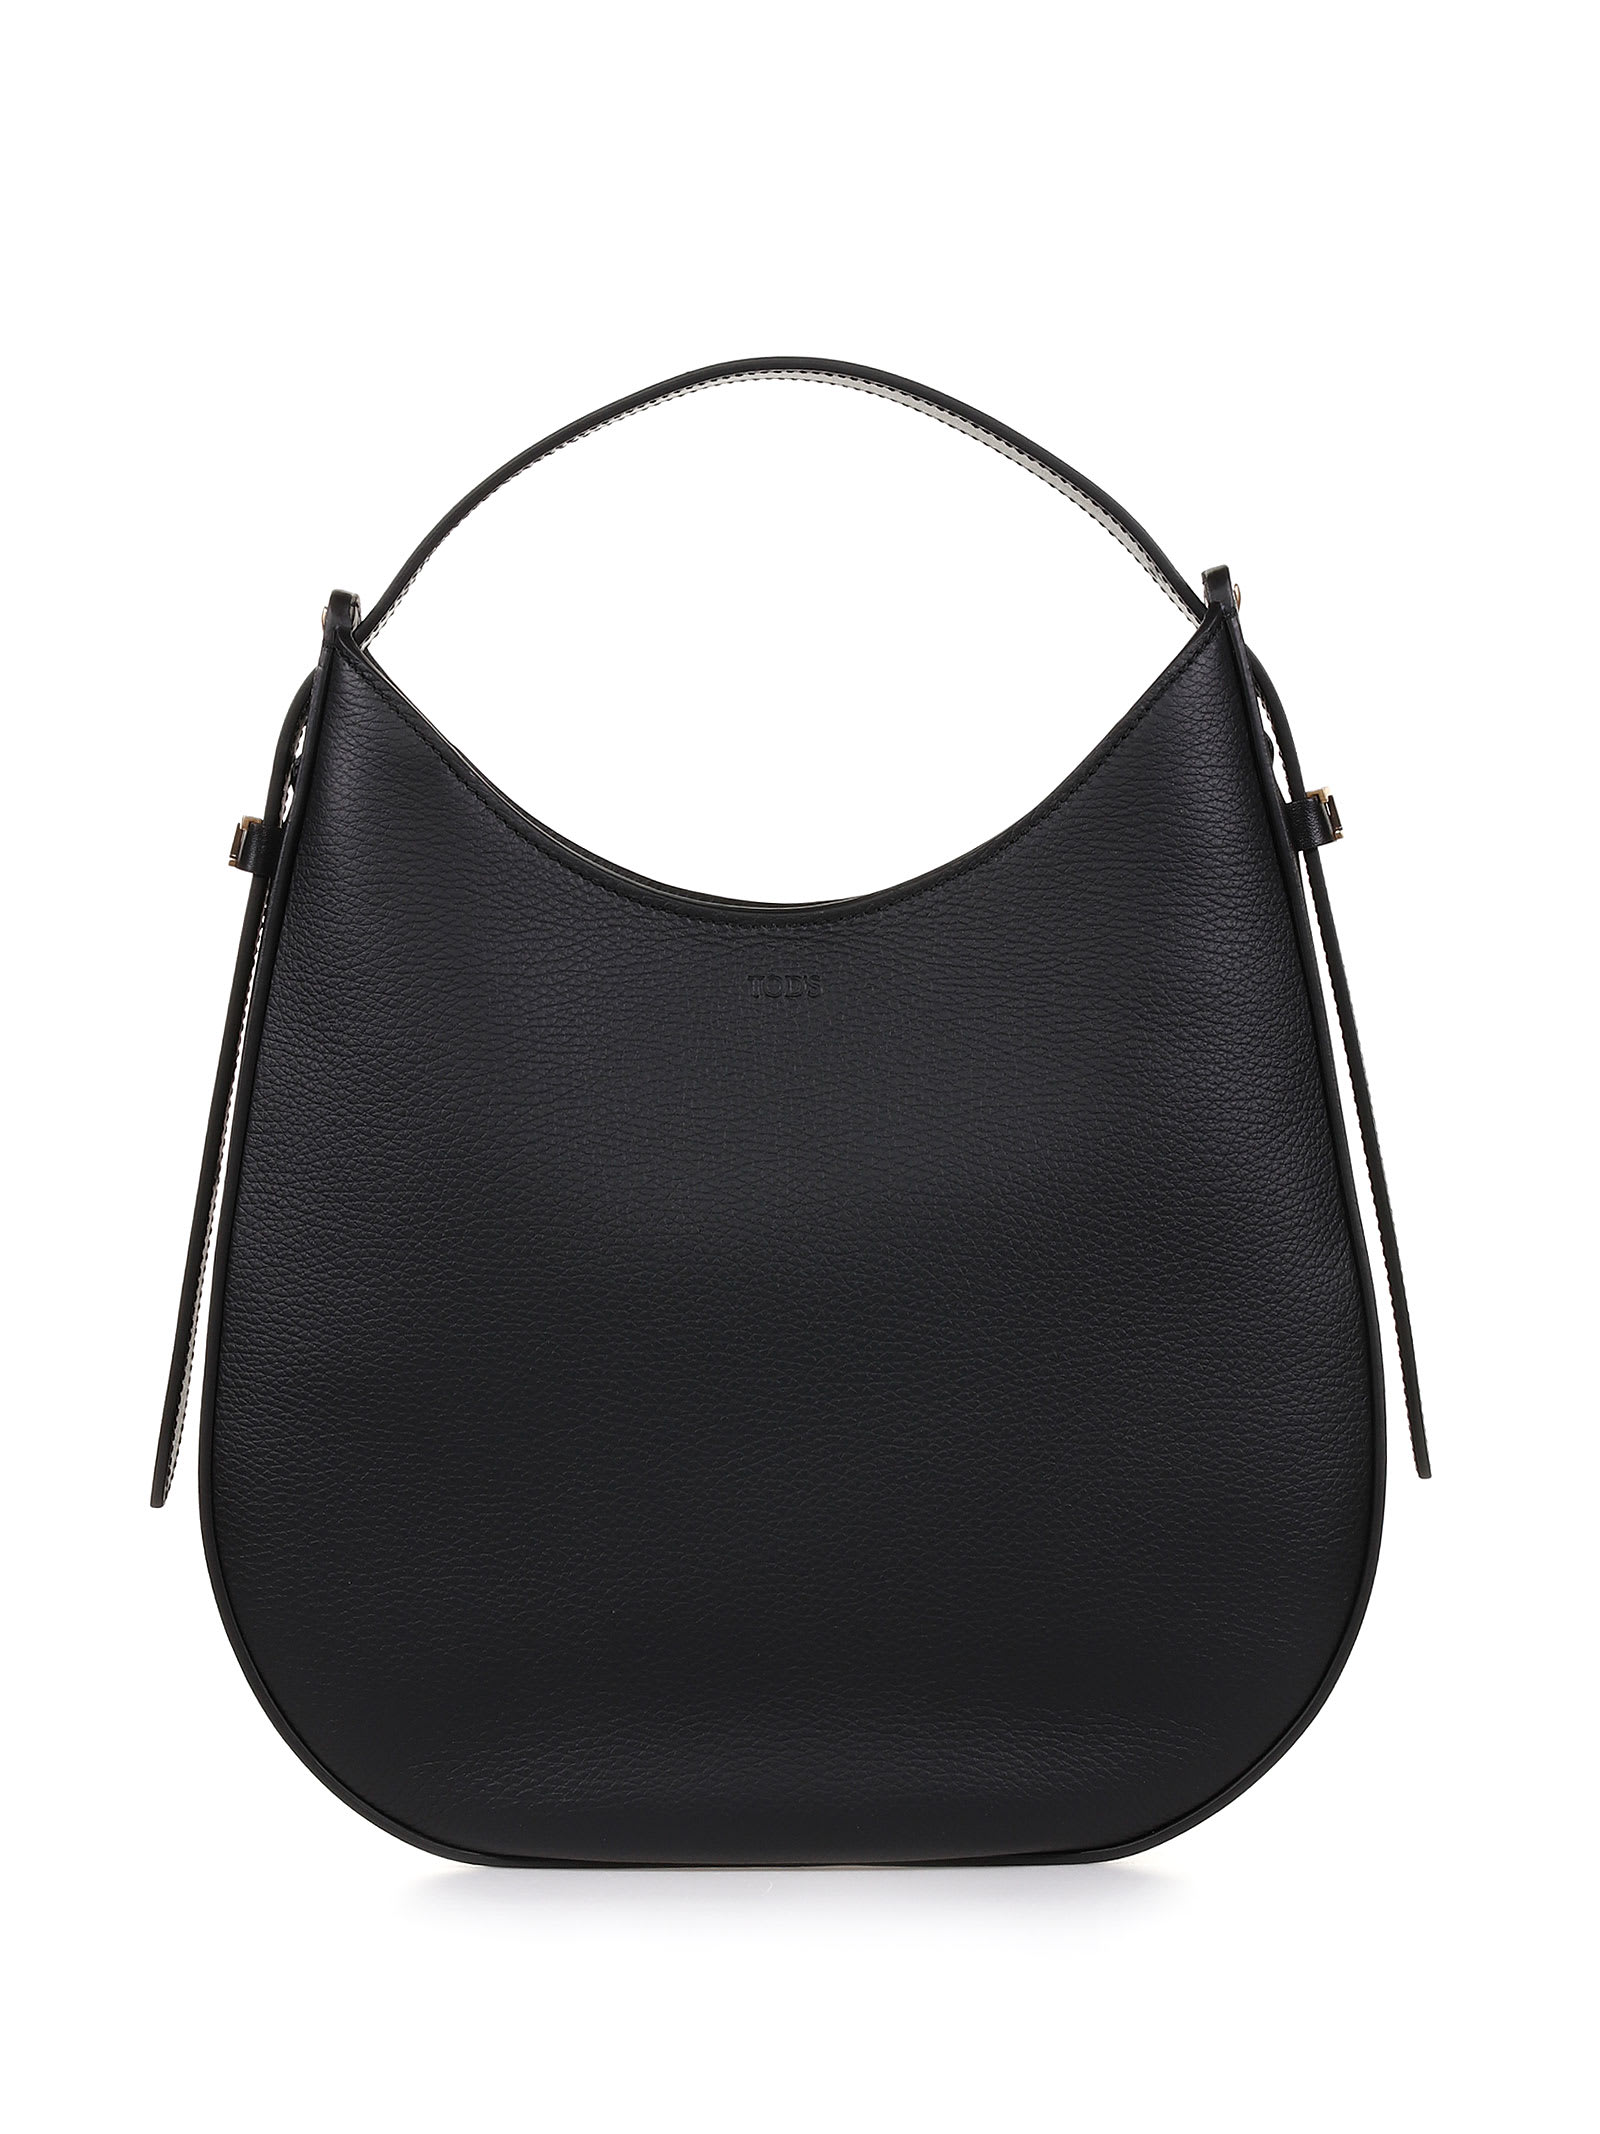 Tods Oboe Bag In Black Leather